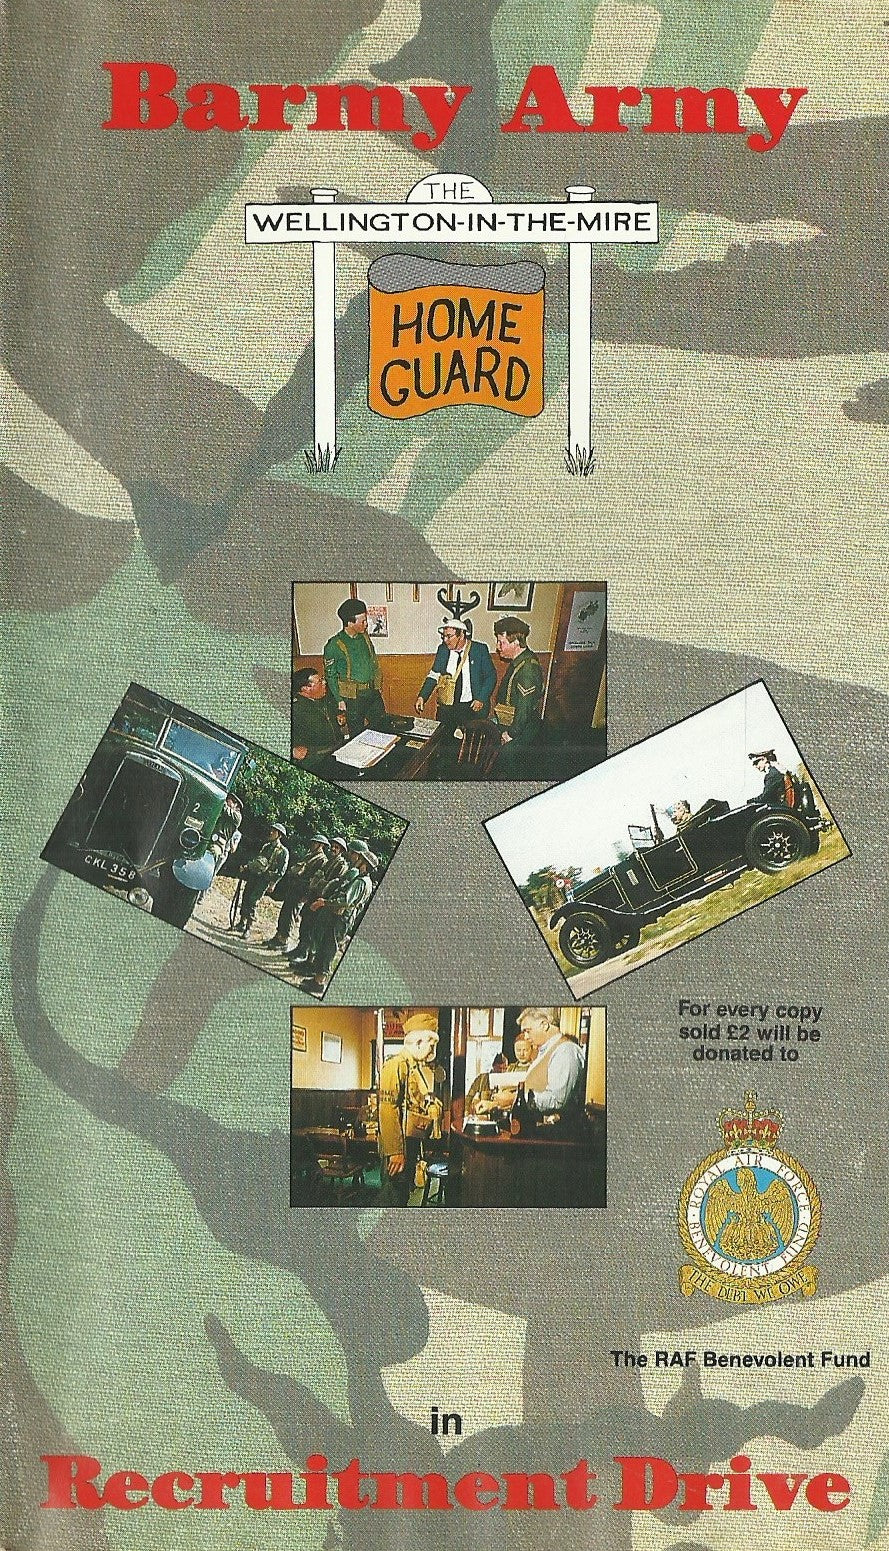 Barmy Army: The Wellington-In-The-Mire Home Guard in Recruitment Drive [VHS]